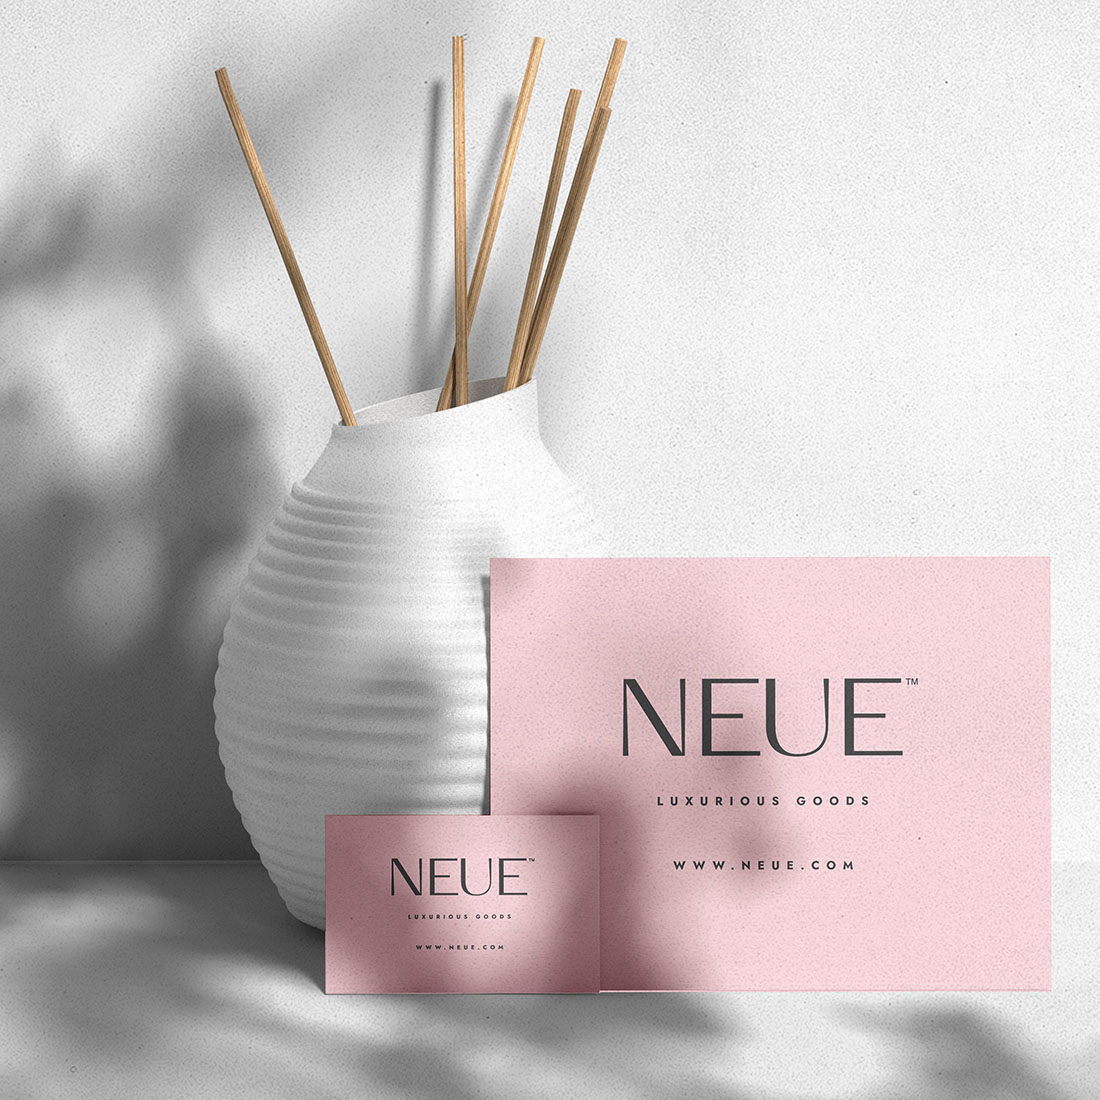 Neue Refined Sans Serif Font business card example.